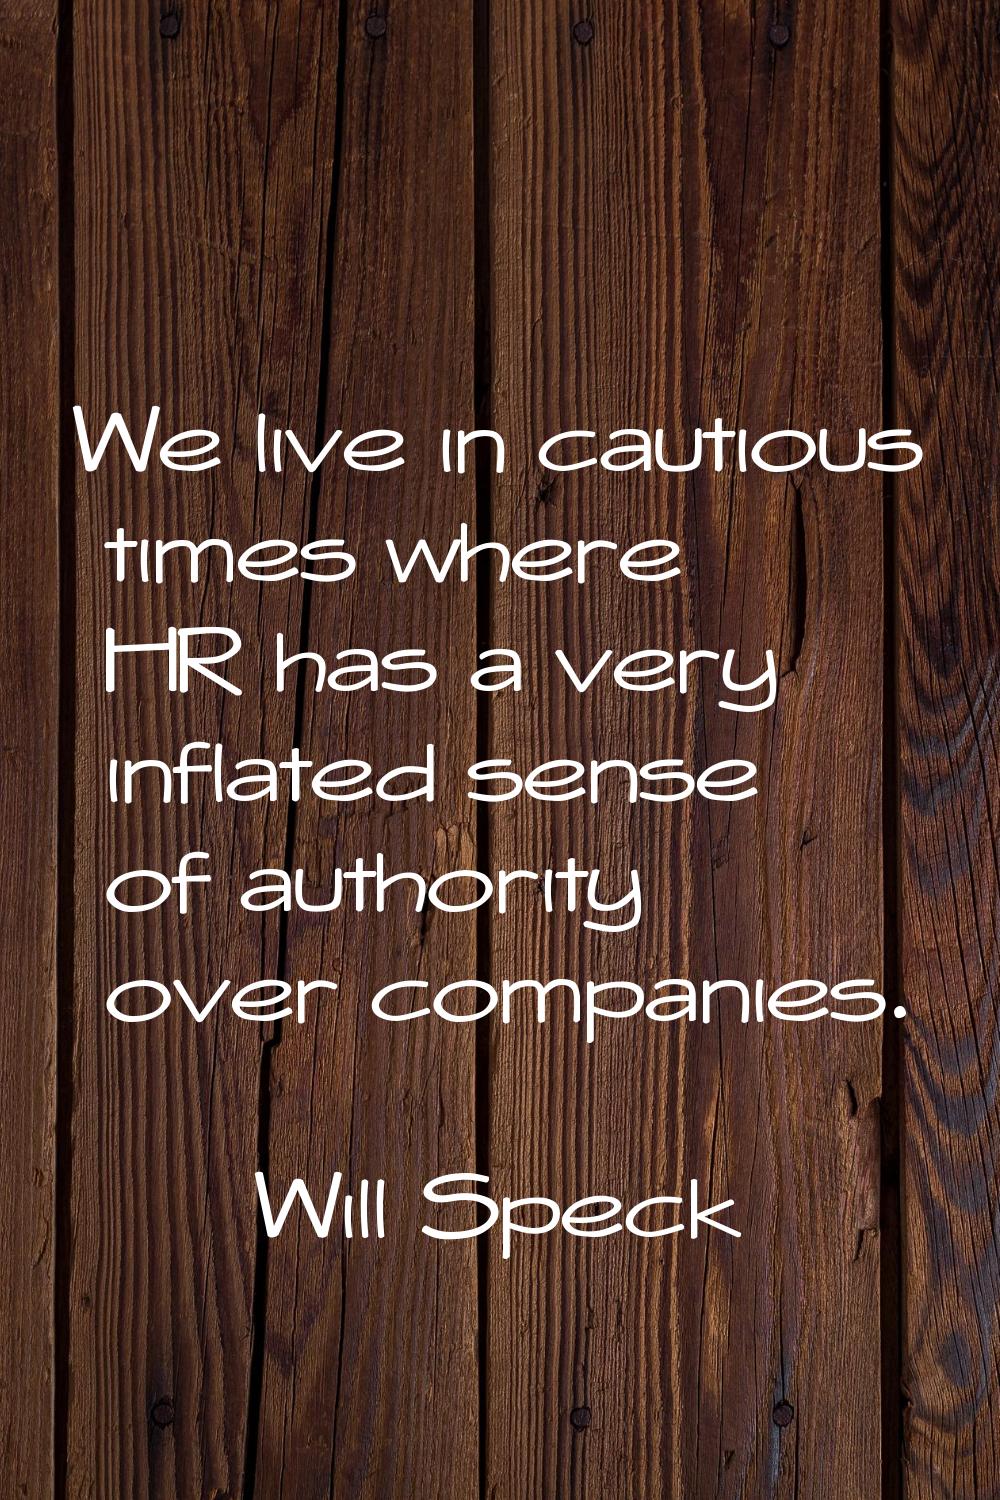 We live in cautious times where HR has a very inflated sense of authority over companies.